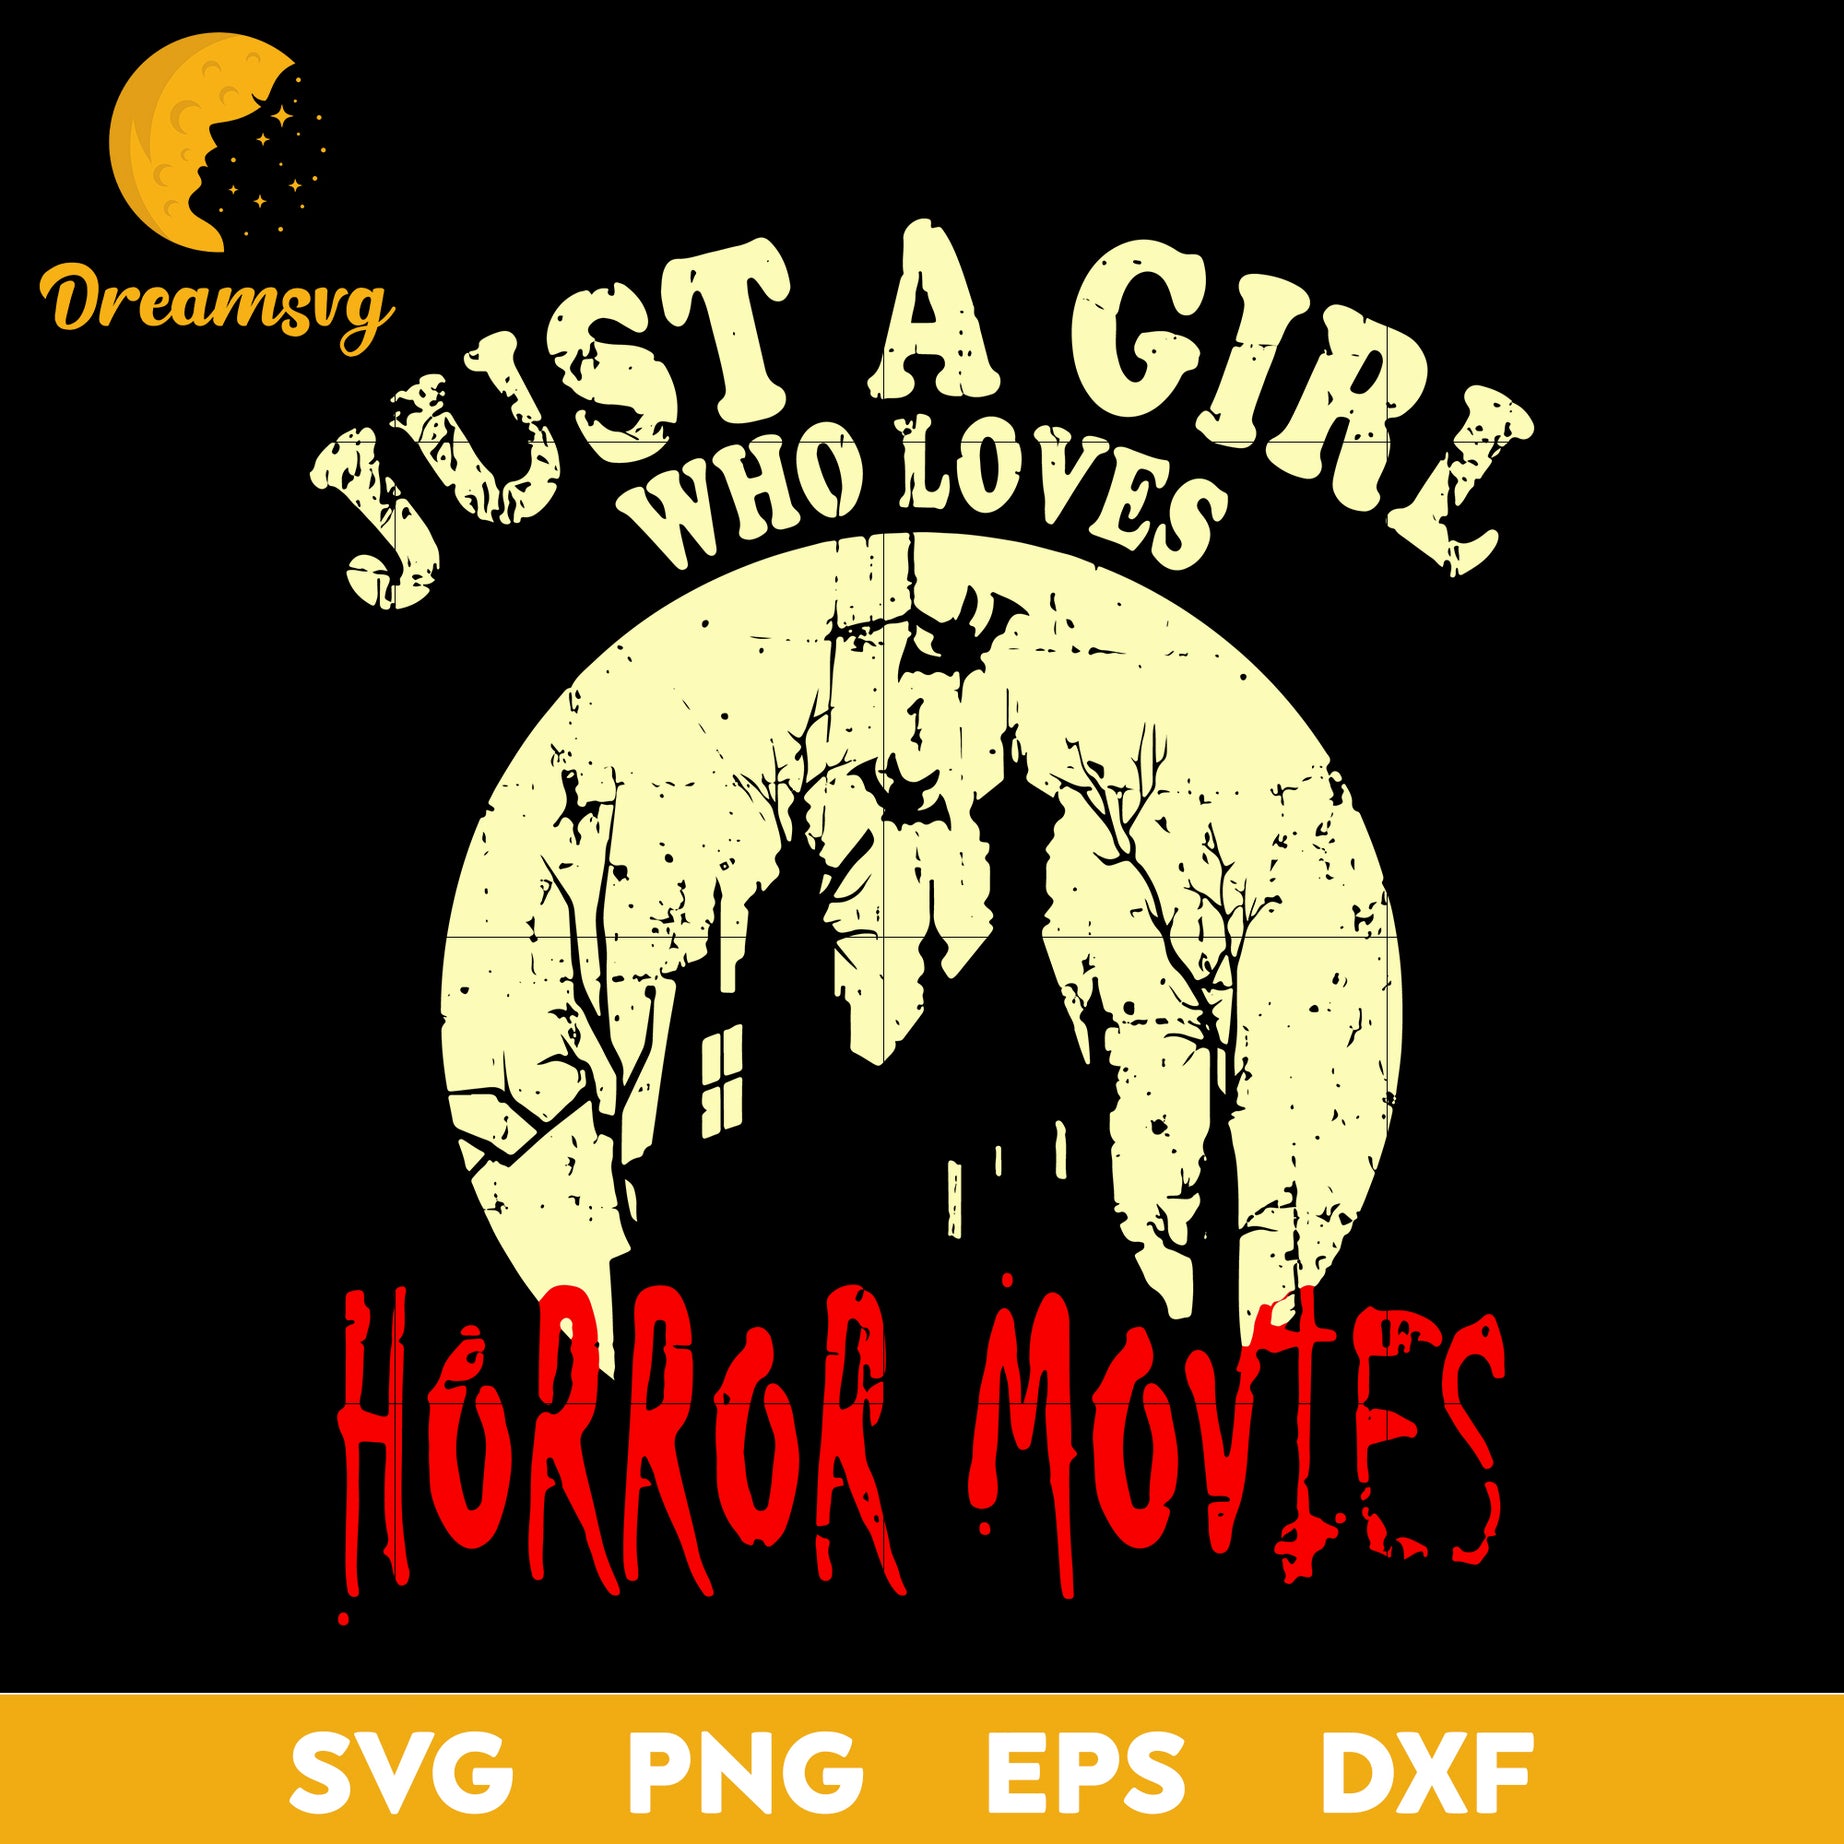 Just A Girl Who Loves Horror Movies svg, Halloween svg, png, dxf, eps digital file.